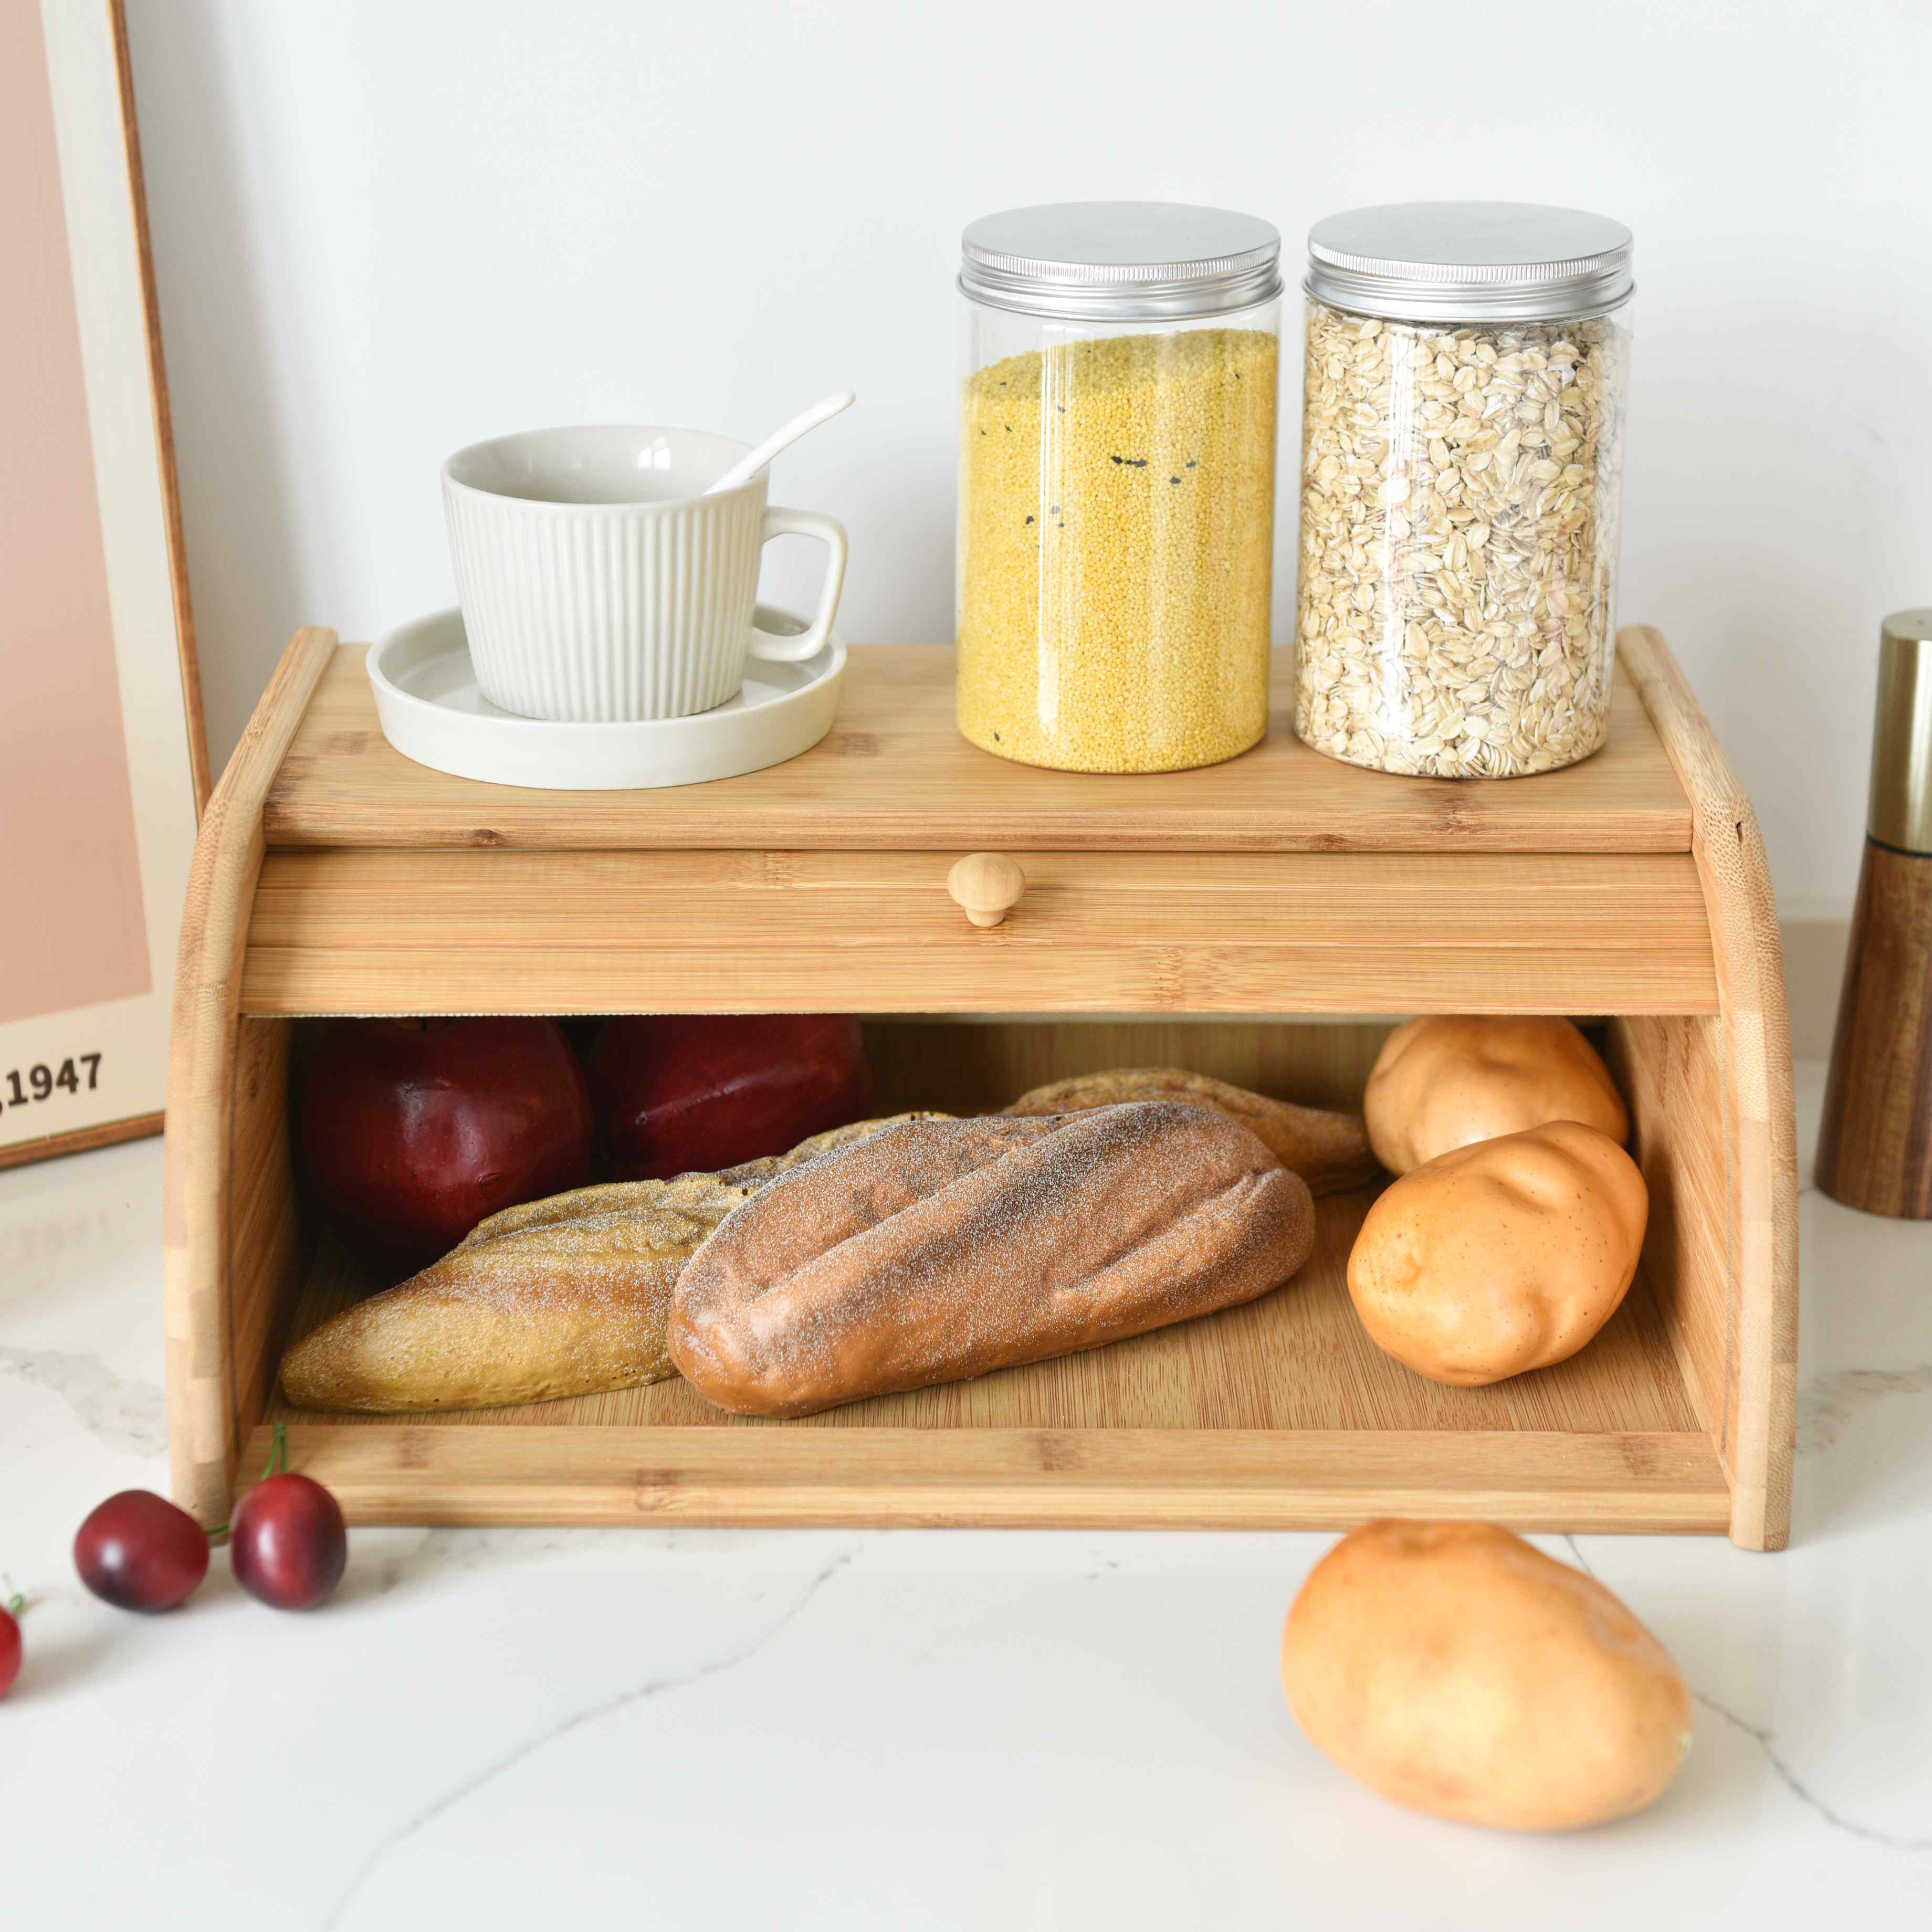 Natural Bamboo Bread Box with Cutting Board